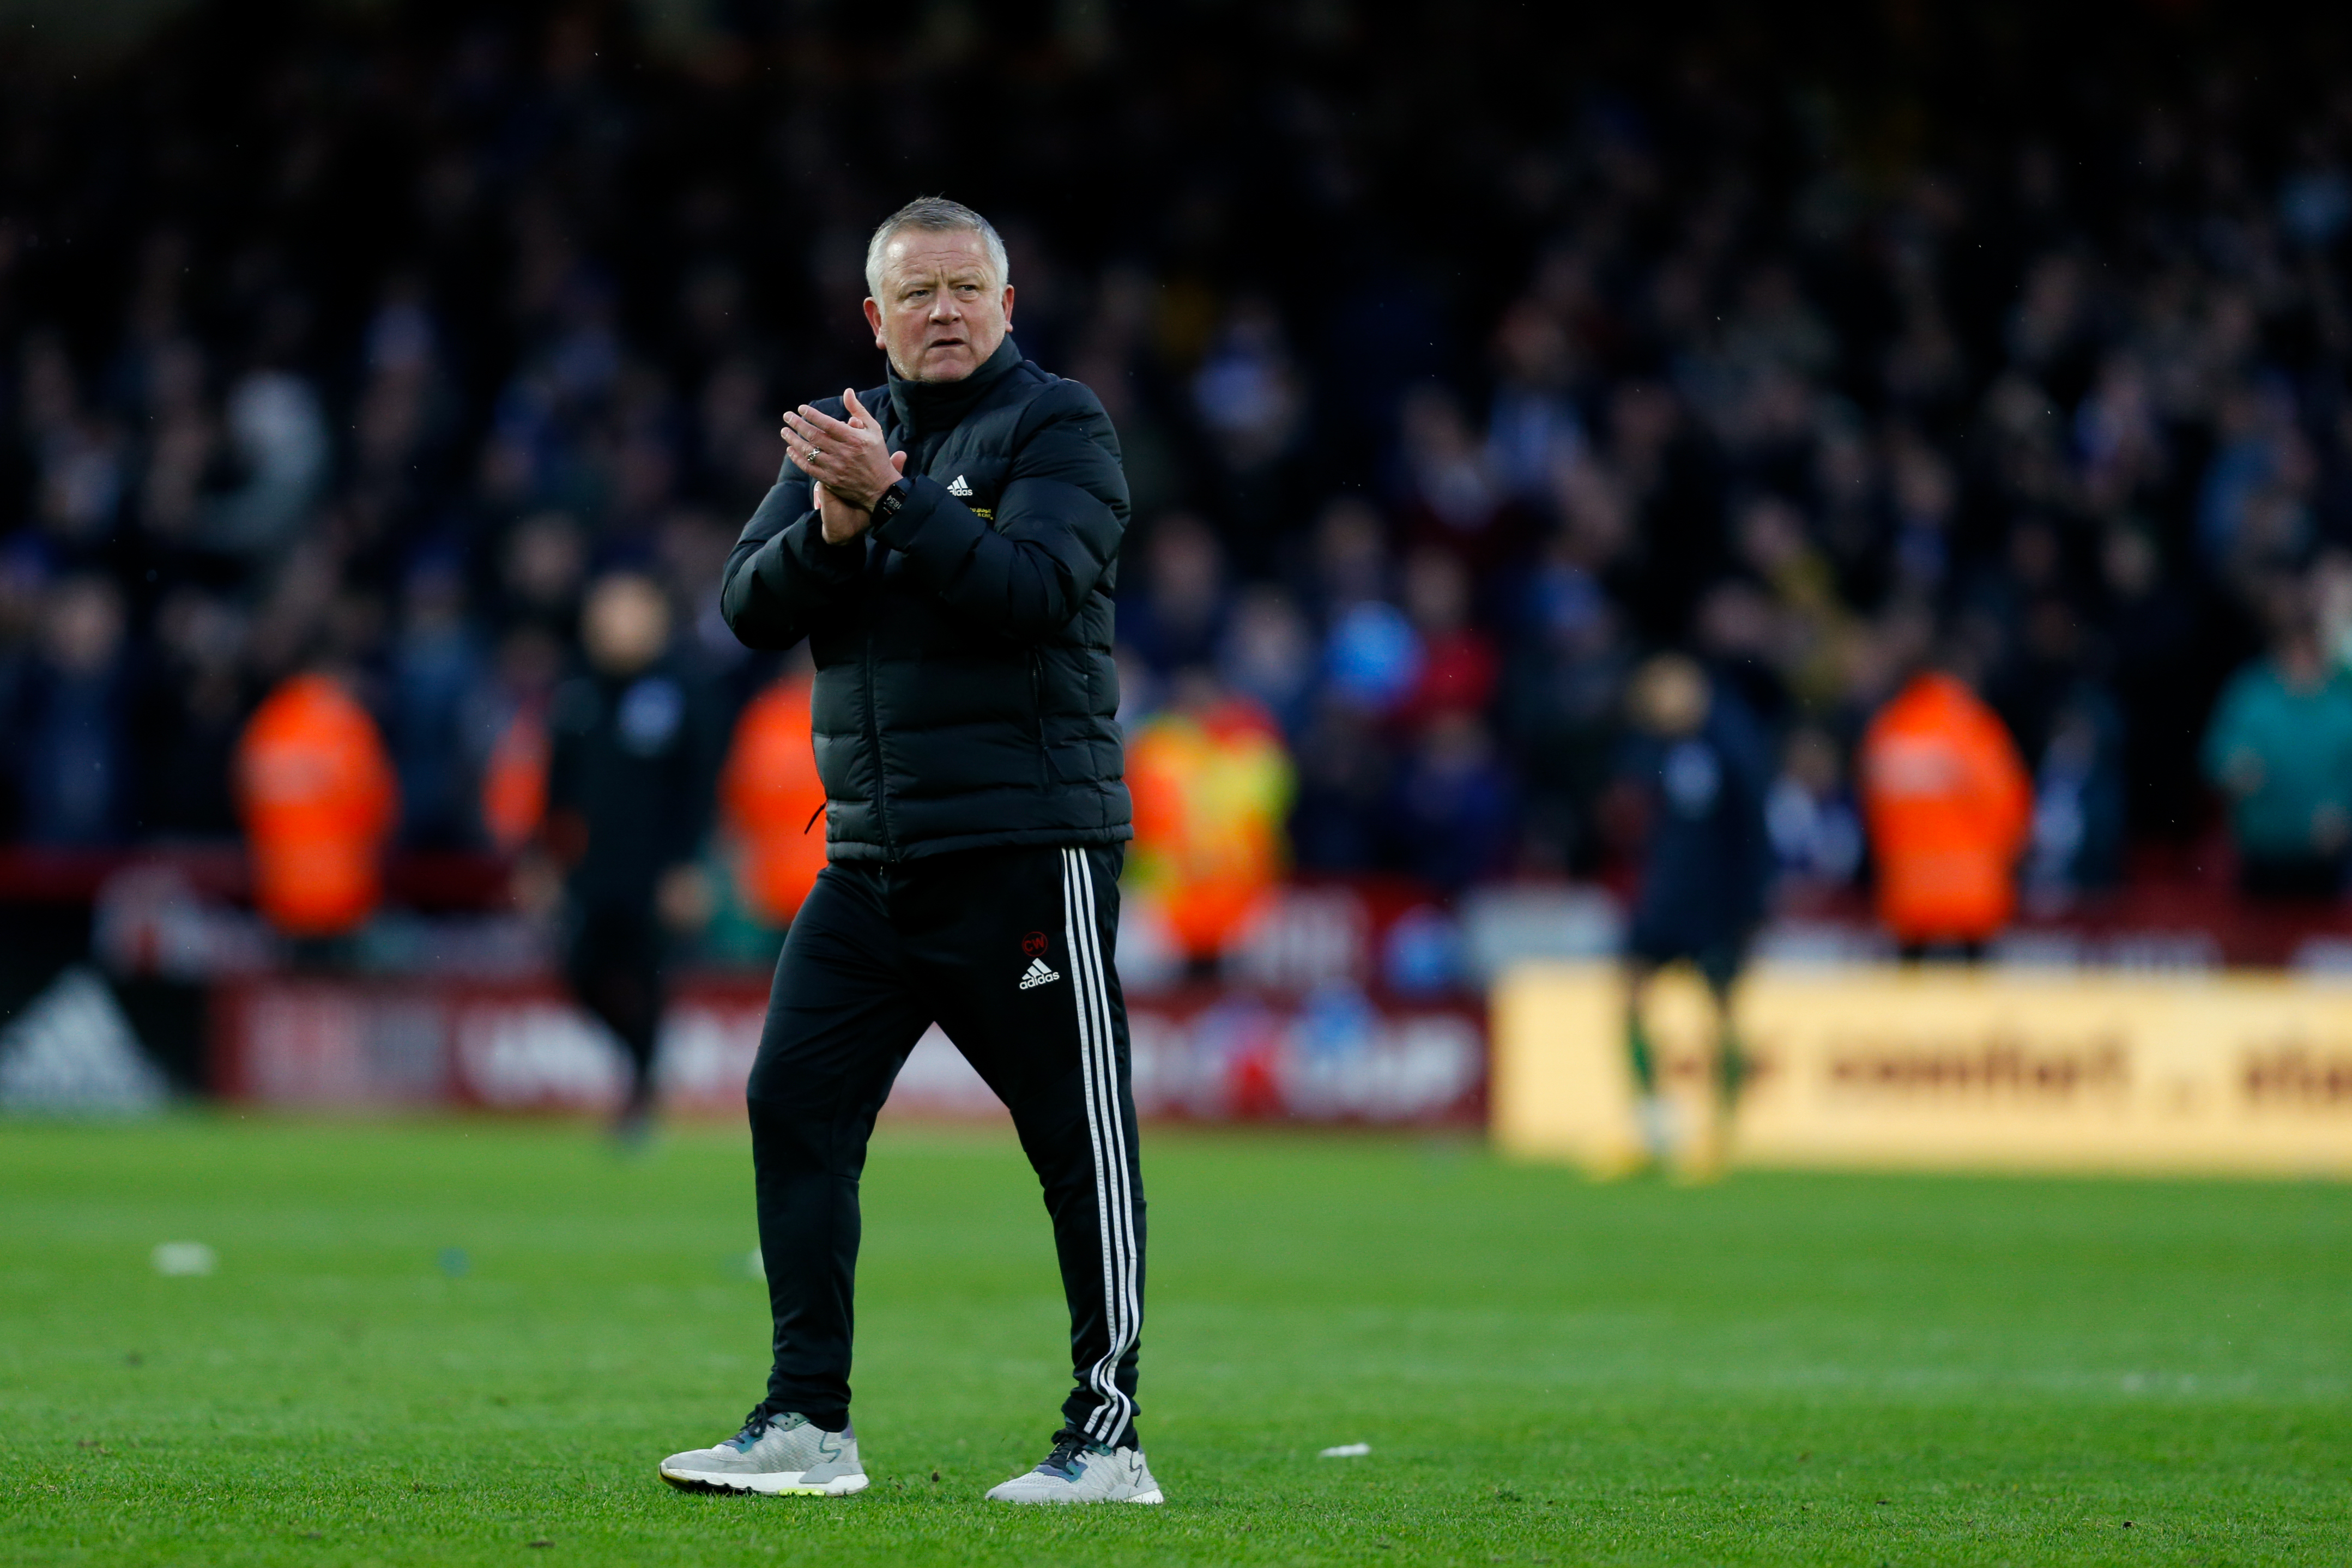 Sheffield United FC can be proud of their achievements this season, claims Chris Wilder